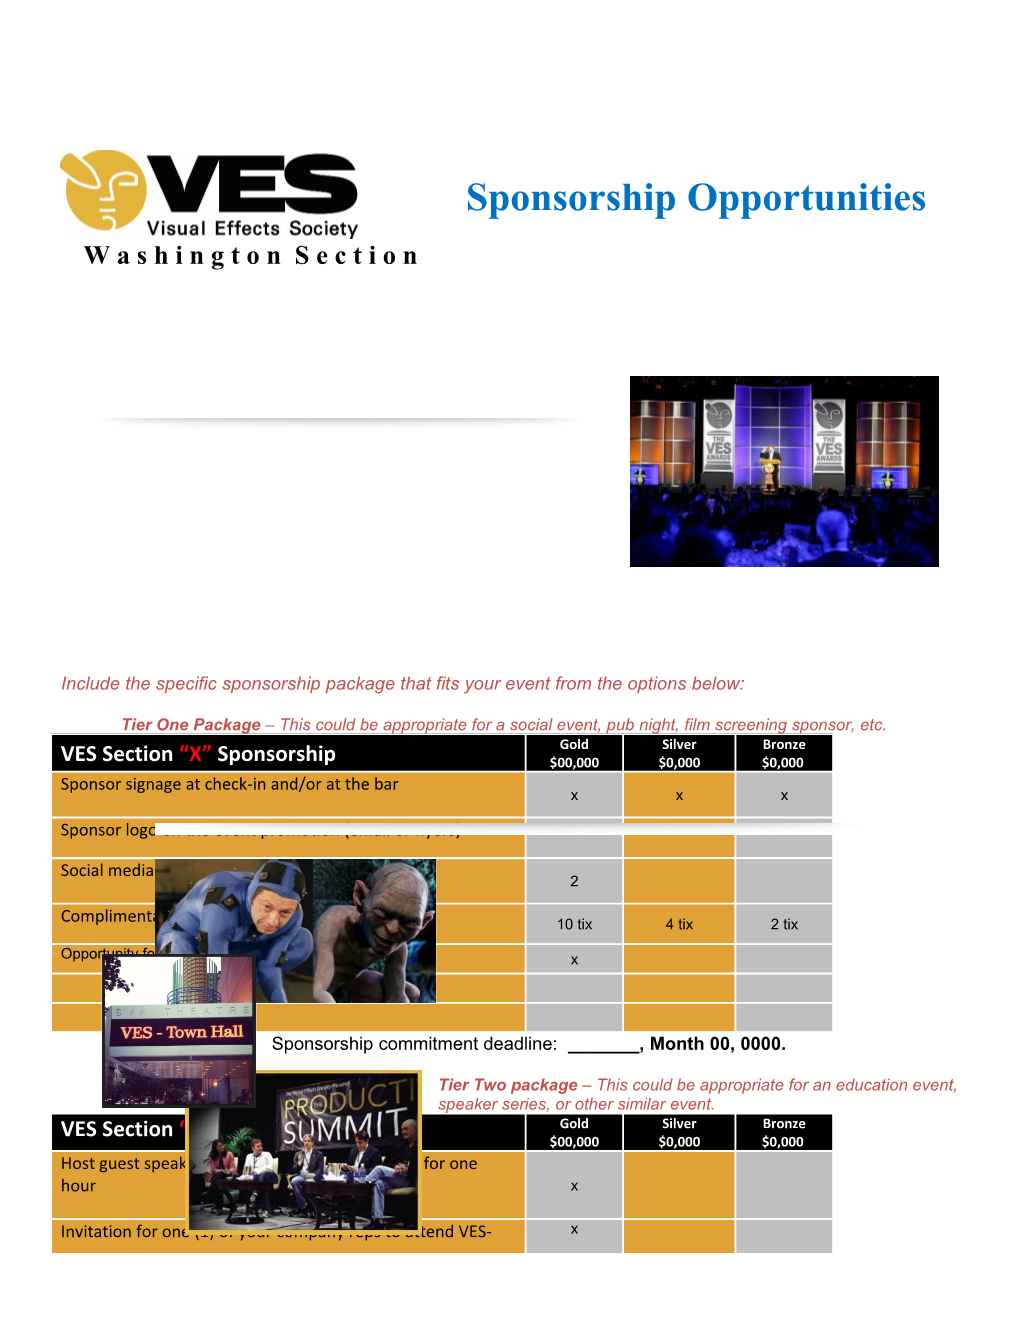 Include the Specific Sponsorship Package That Fits Your Event from the Options Below